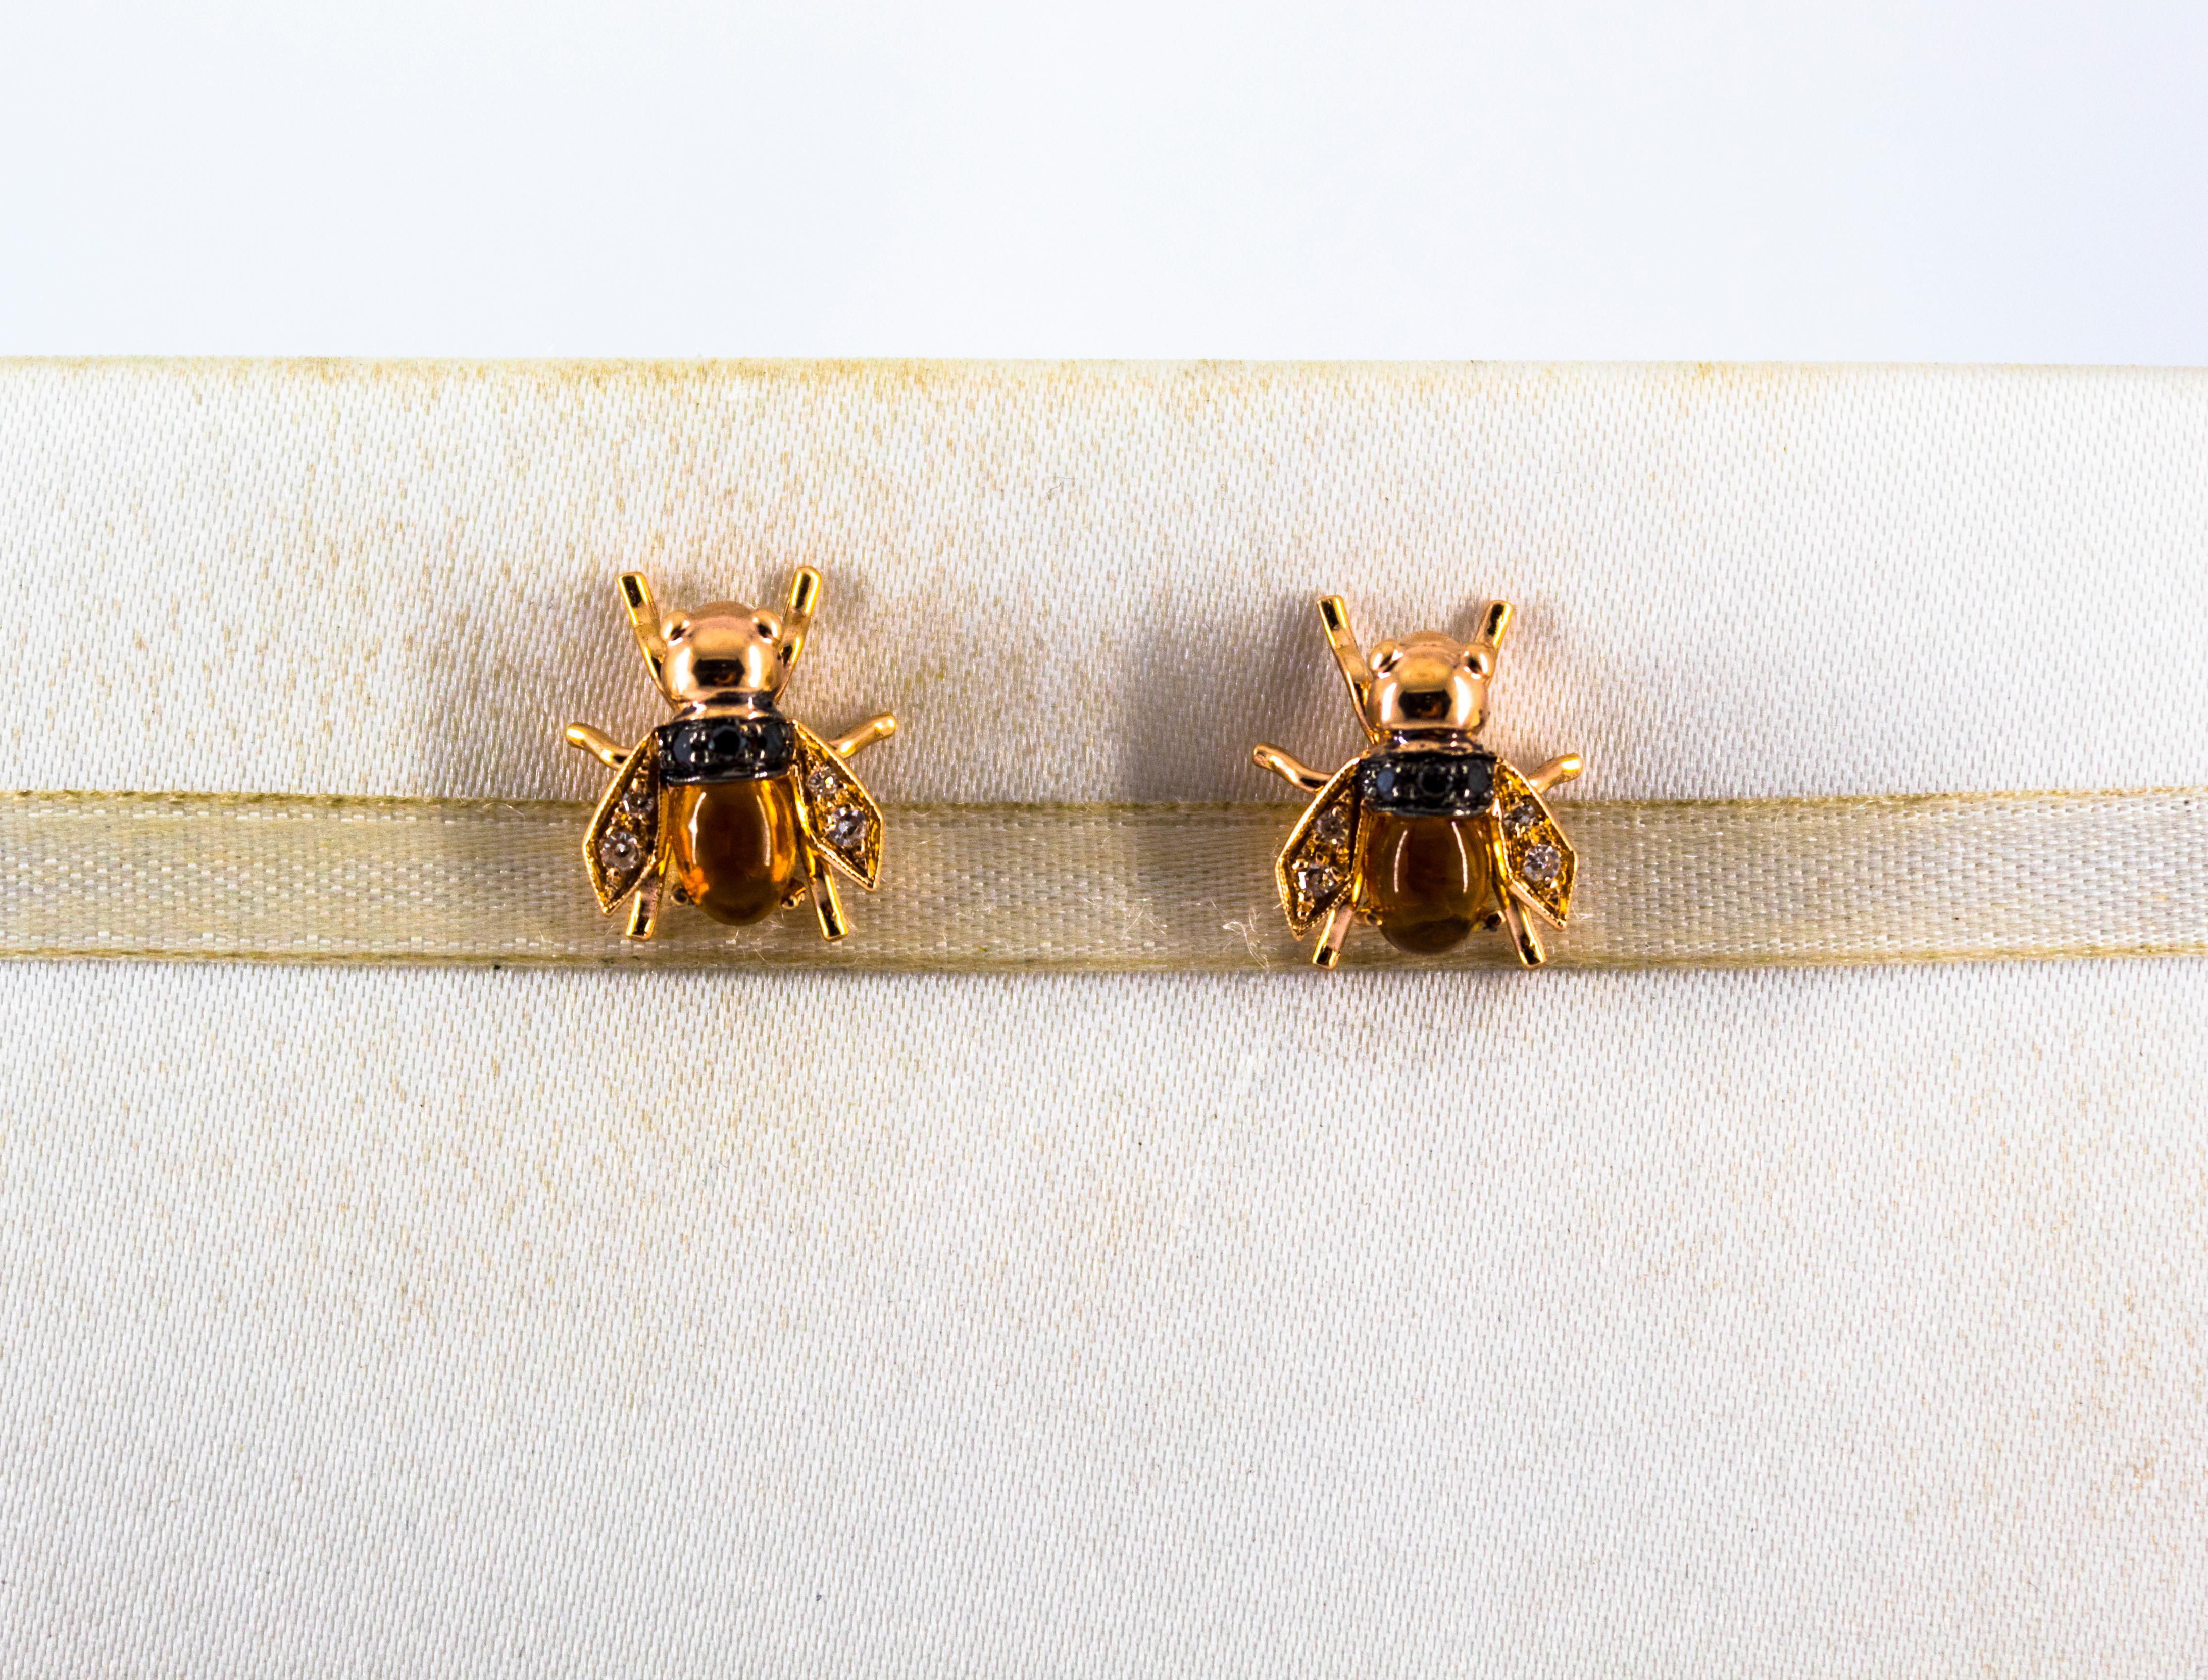 These Earrings are made of 9K Yellow Gold.
These Earrings have 0.18 Carats of White Brilliant Cut Diamonds.
These Earrings have 0.06 Carats of Black Brilliant Cut Diamonds.
These Earrings have 2.00 Carats of Citrine but they are available also with